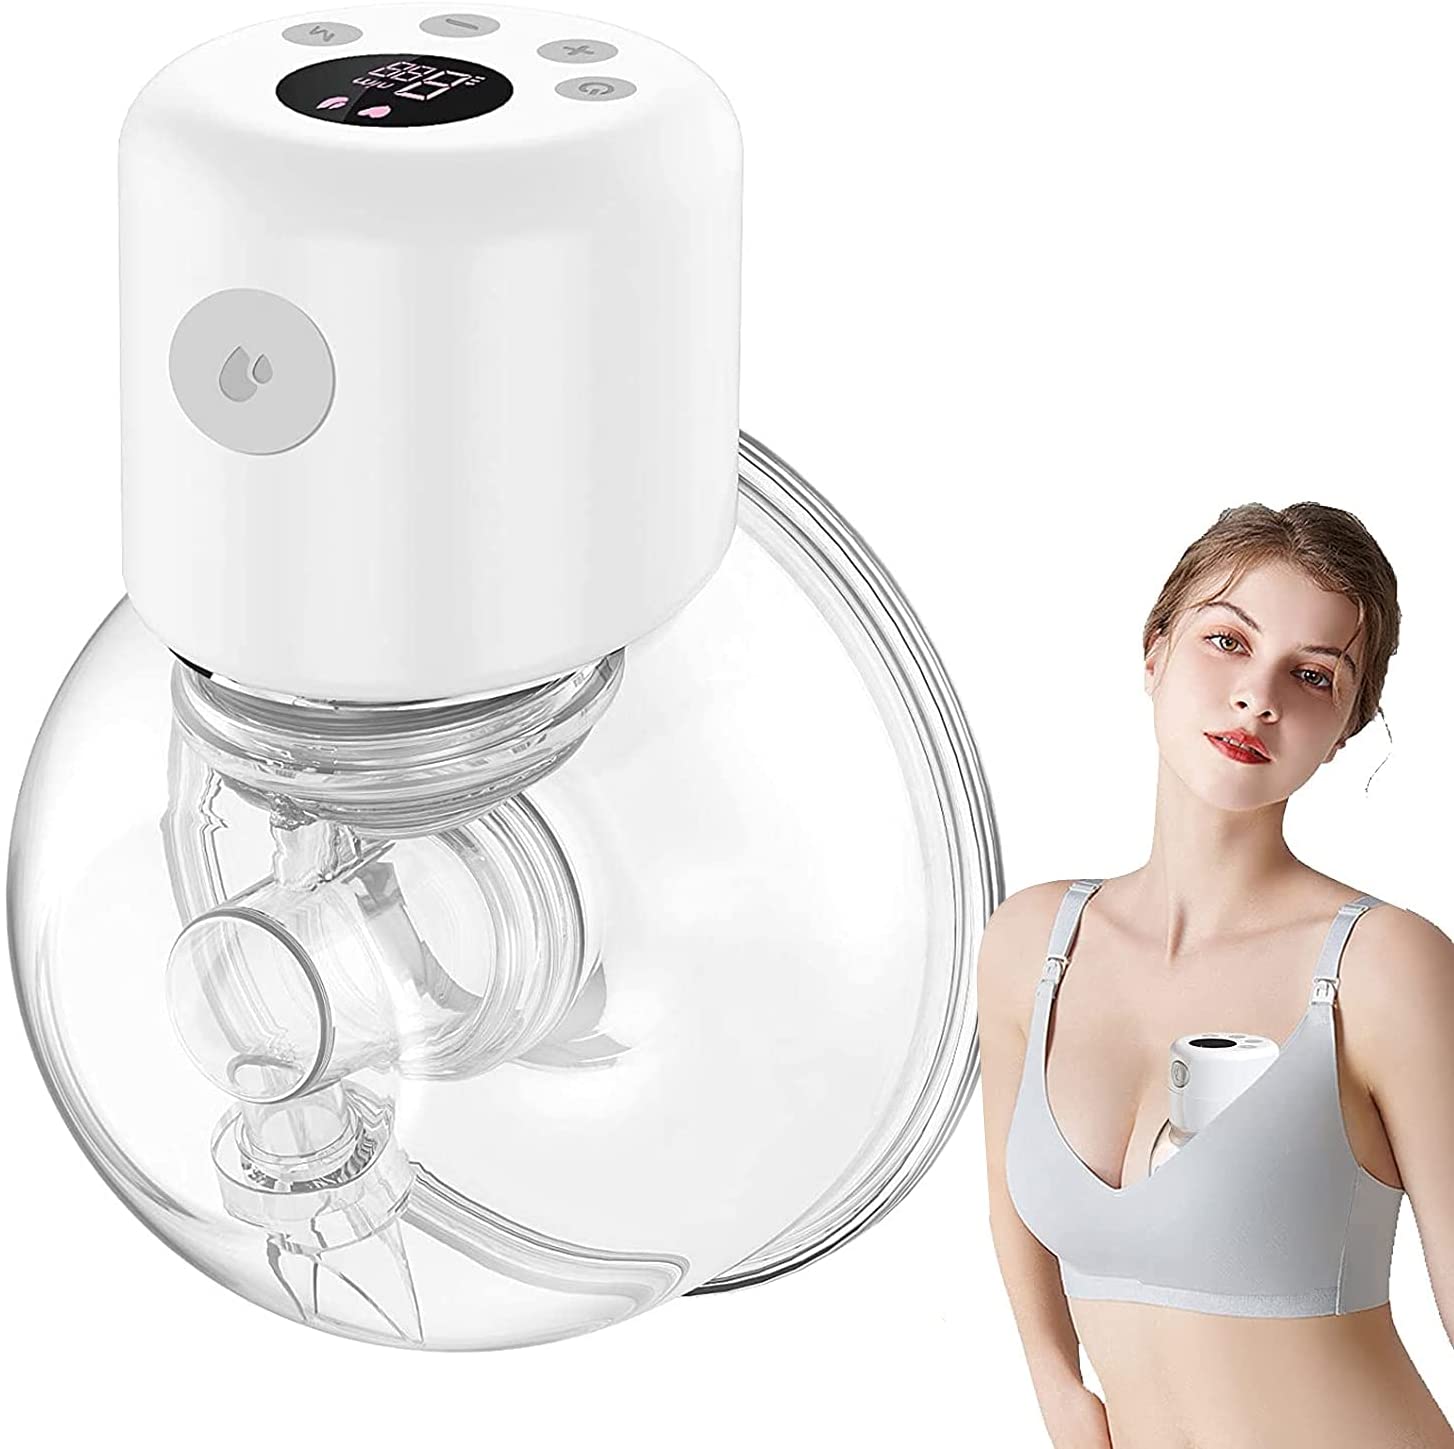 Doosl Wearable Electric Breast Pump, Hands Free Breast Pump, Portable Electric Breastfeeding Pump, Pạin Ḟree, Silent, Single, Rechargeable Milk Pump, with LCD Screen Massage and Memory Mode